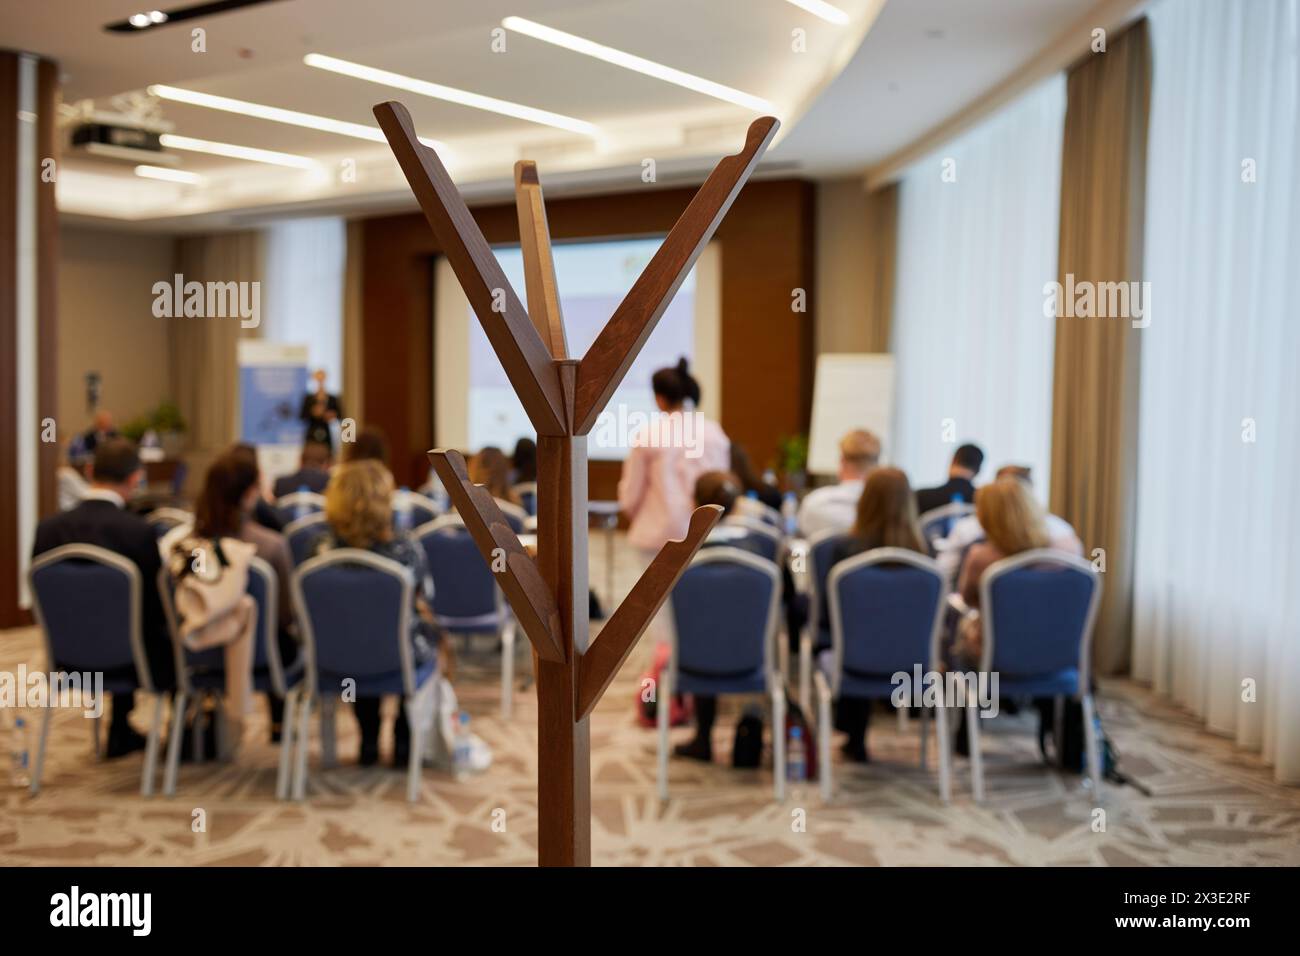 Wooden hat and coat stand in room with people sitting on chairs, shallow dof. Stock Photo